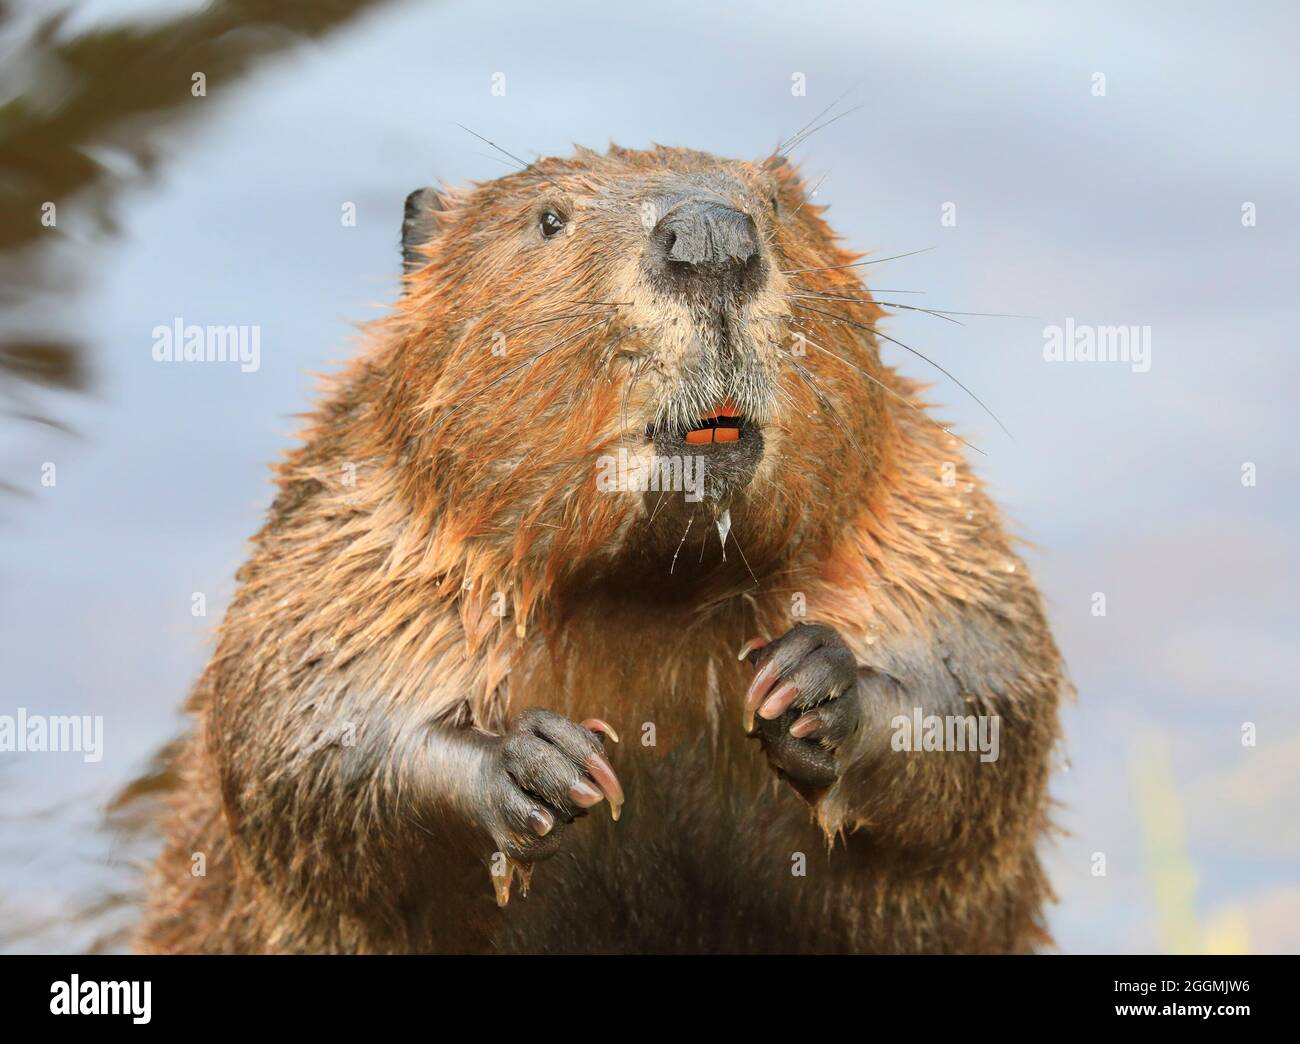 A close up portrait view of an North American beaver standing and smelling the air, Quebec, Canada Stock Photo